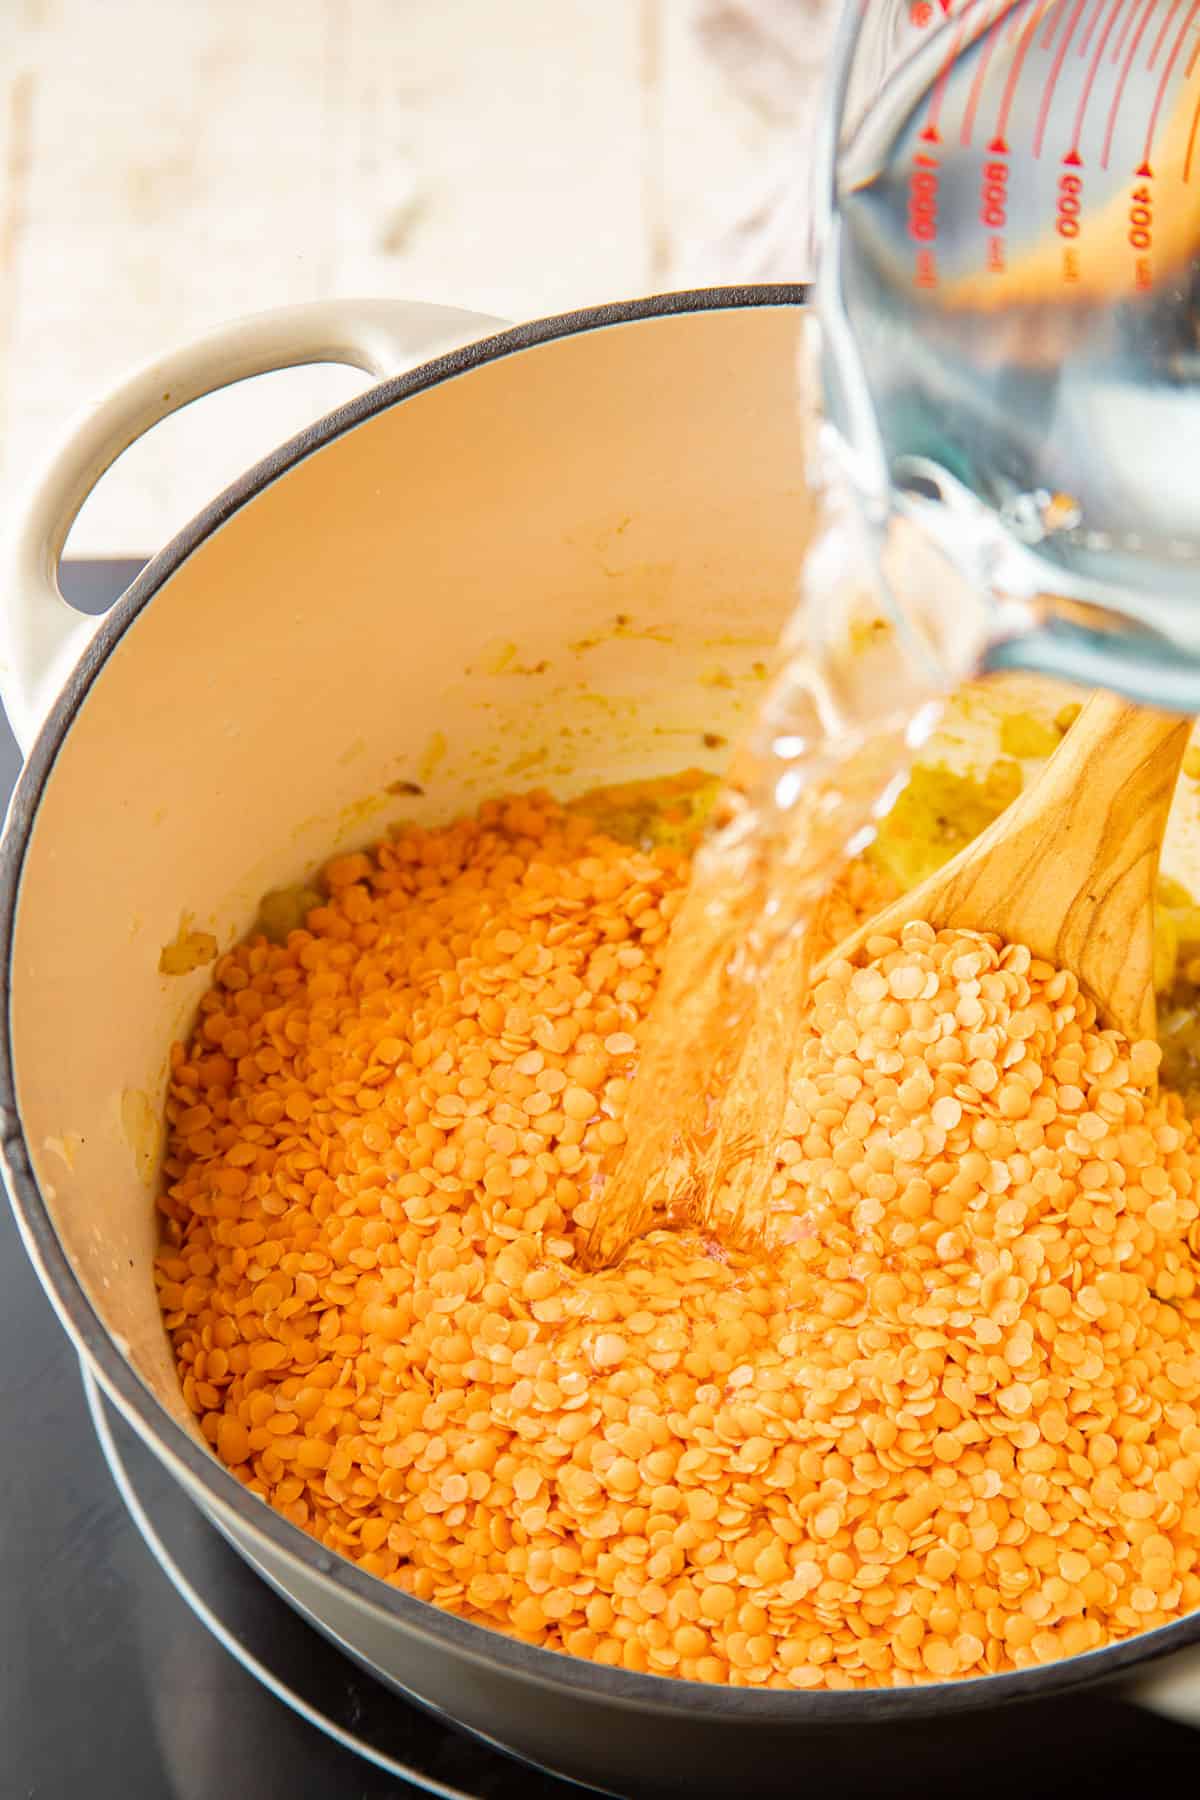 Water being poured into a pot of dry red lentils.